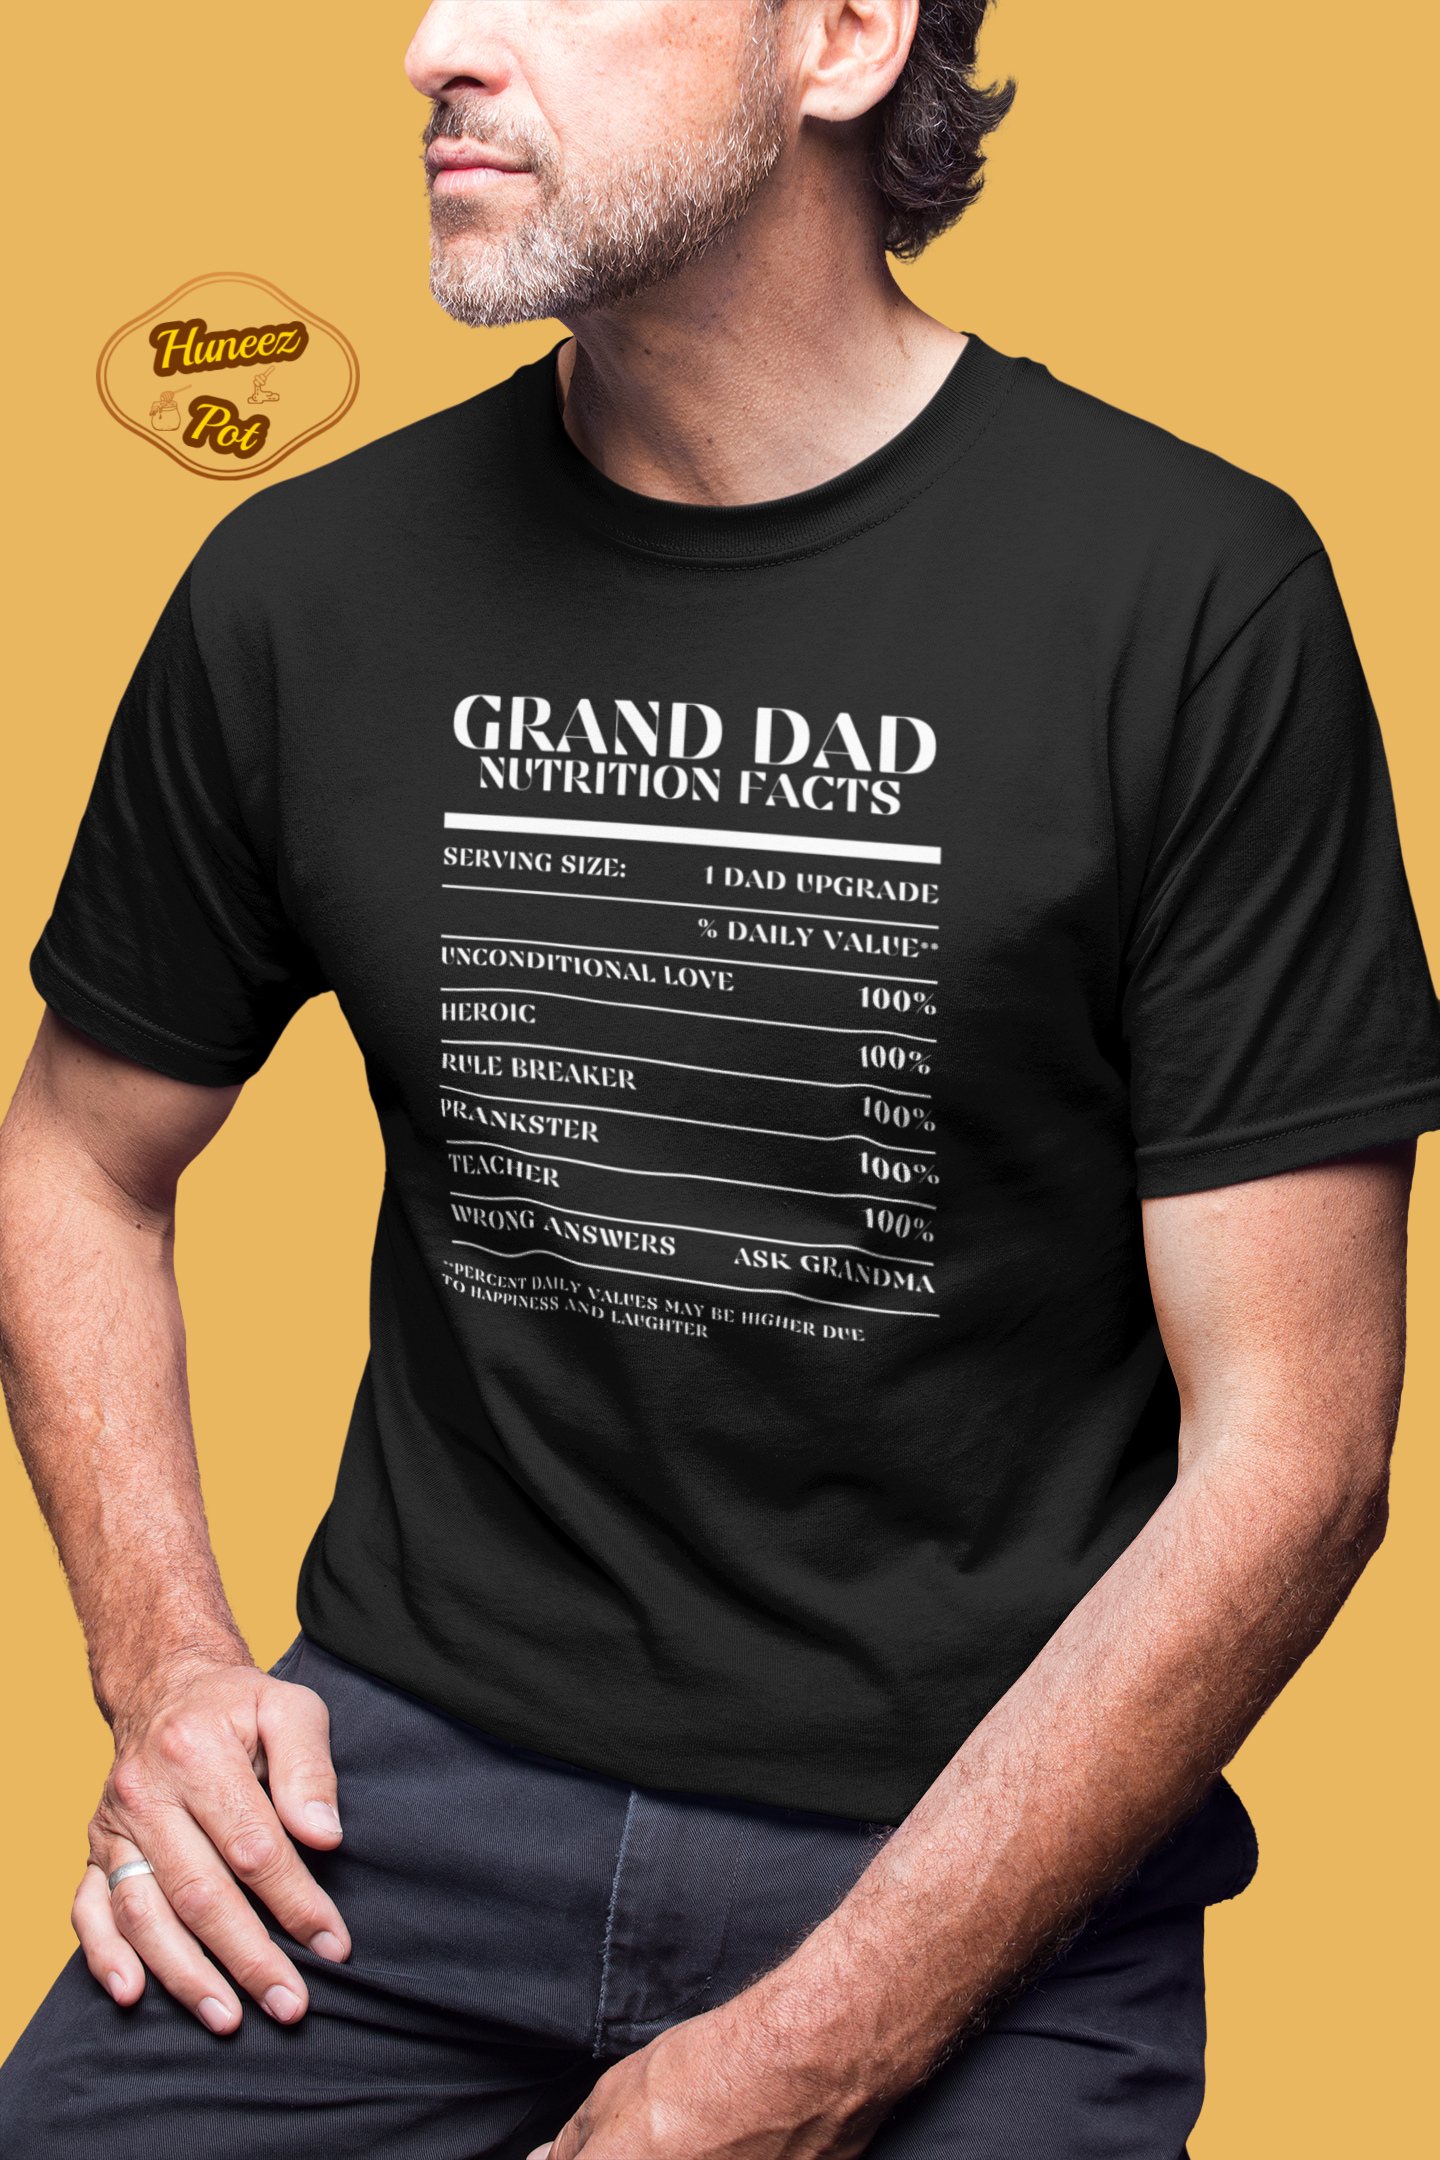 Nutrition Facts T-Shirt SS - Grand Dad - White